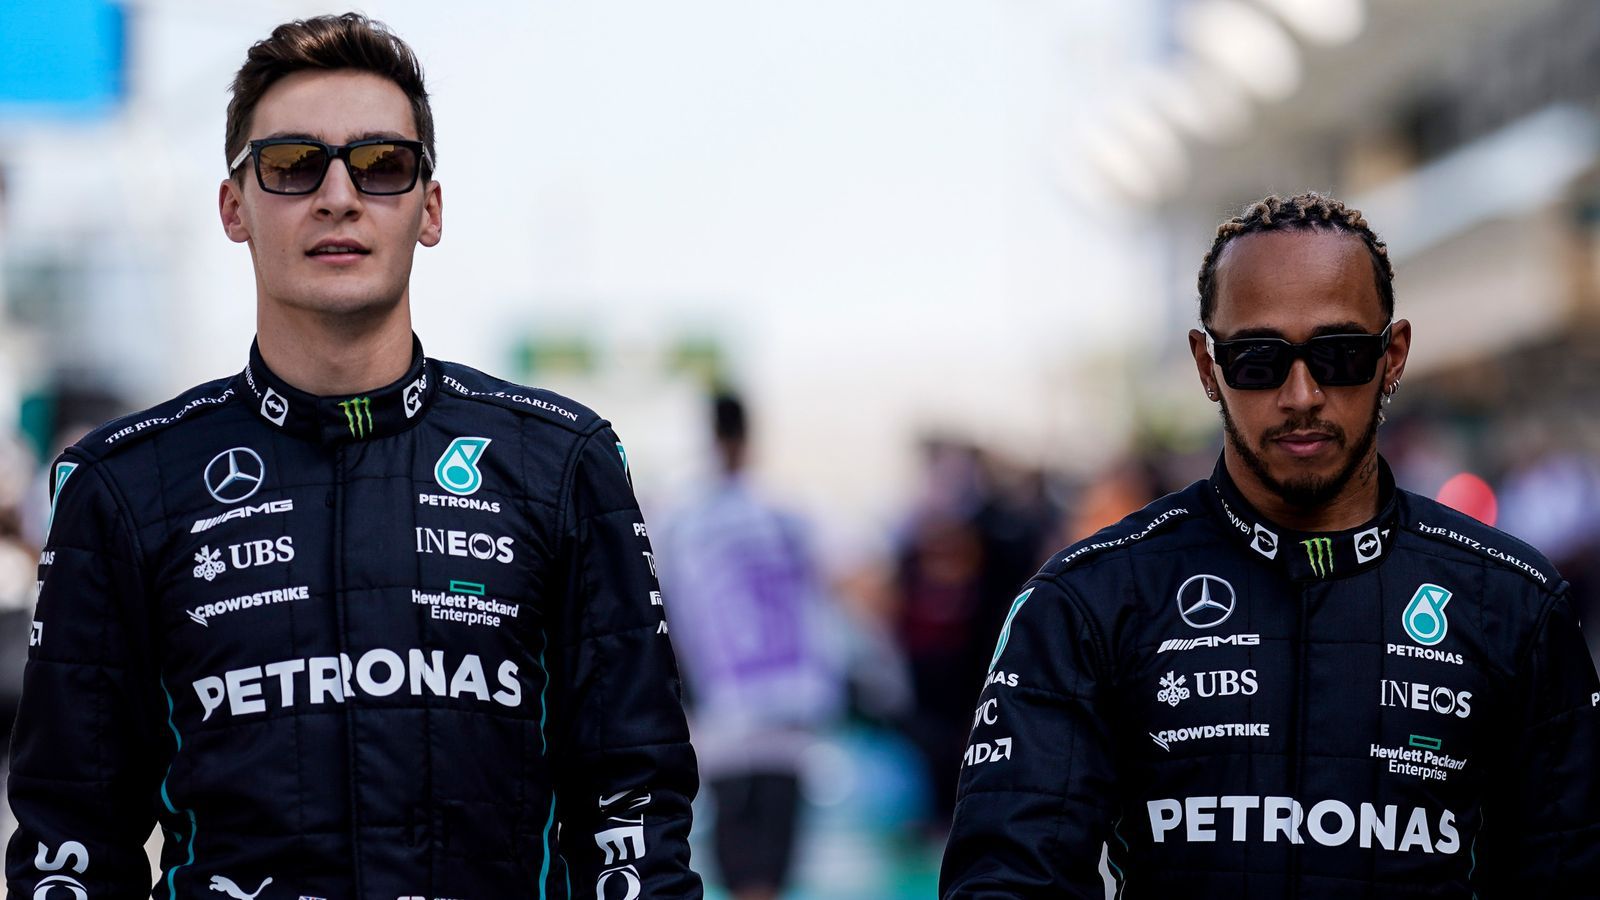 Mercedes' George Russell Has Been 'phenomenal'; Lewis Hamilton 'hates Losing To Team Mates'